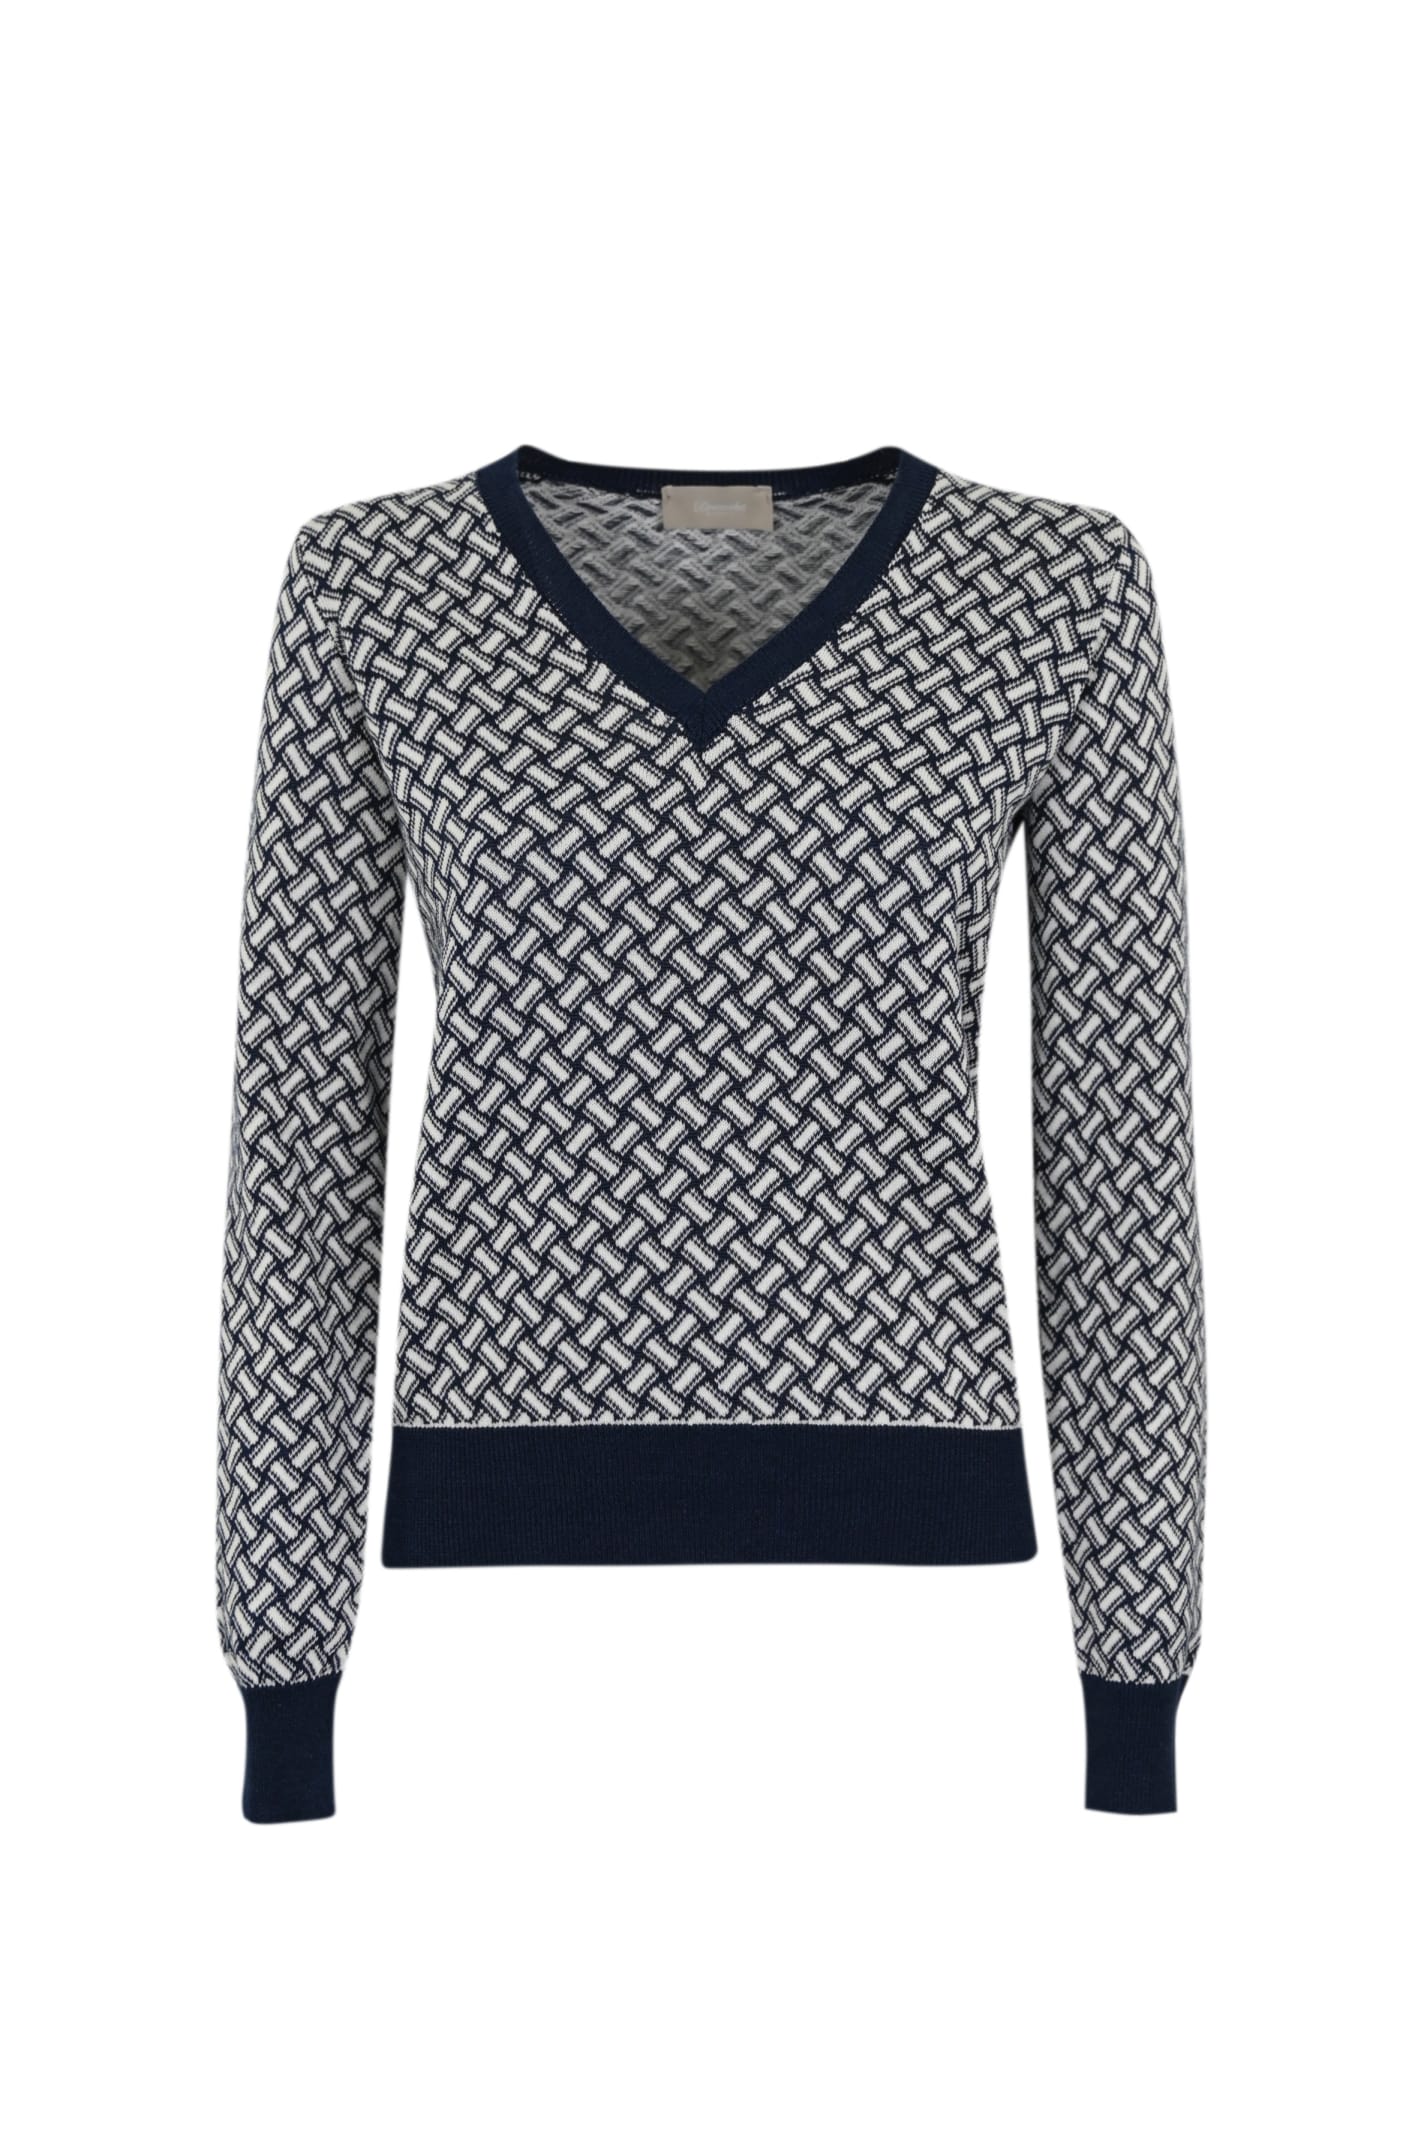 Shop Drumohr Blue And White Cotton And Linen Sweater